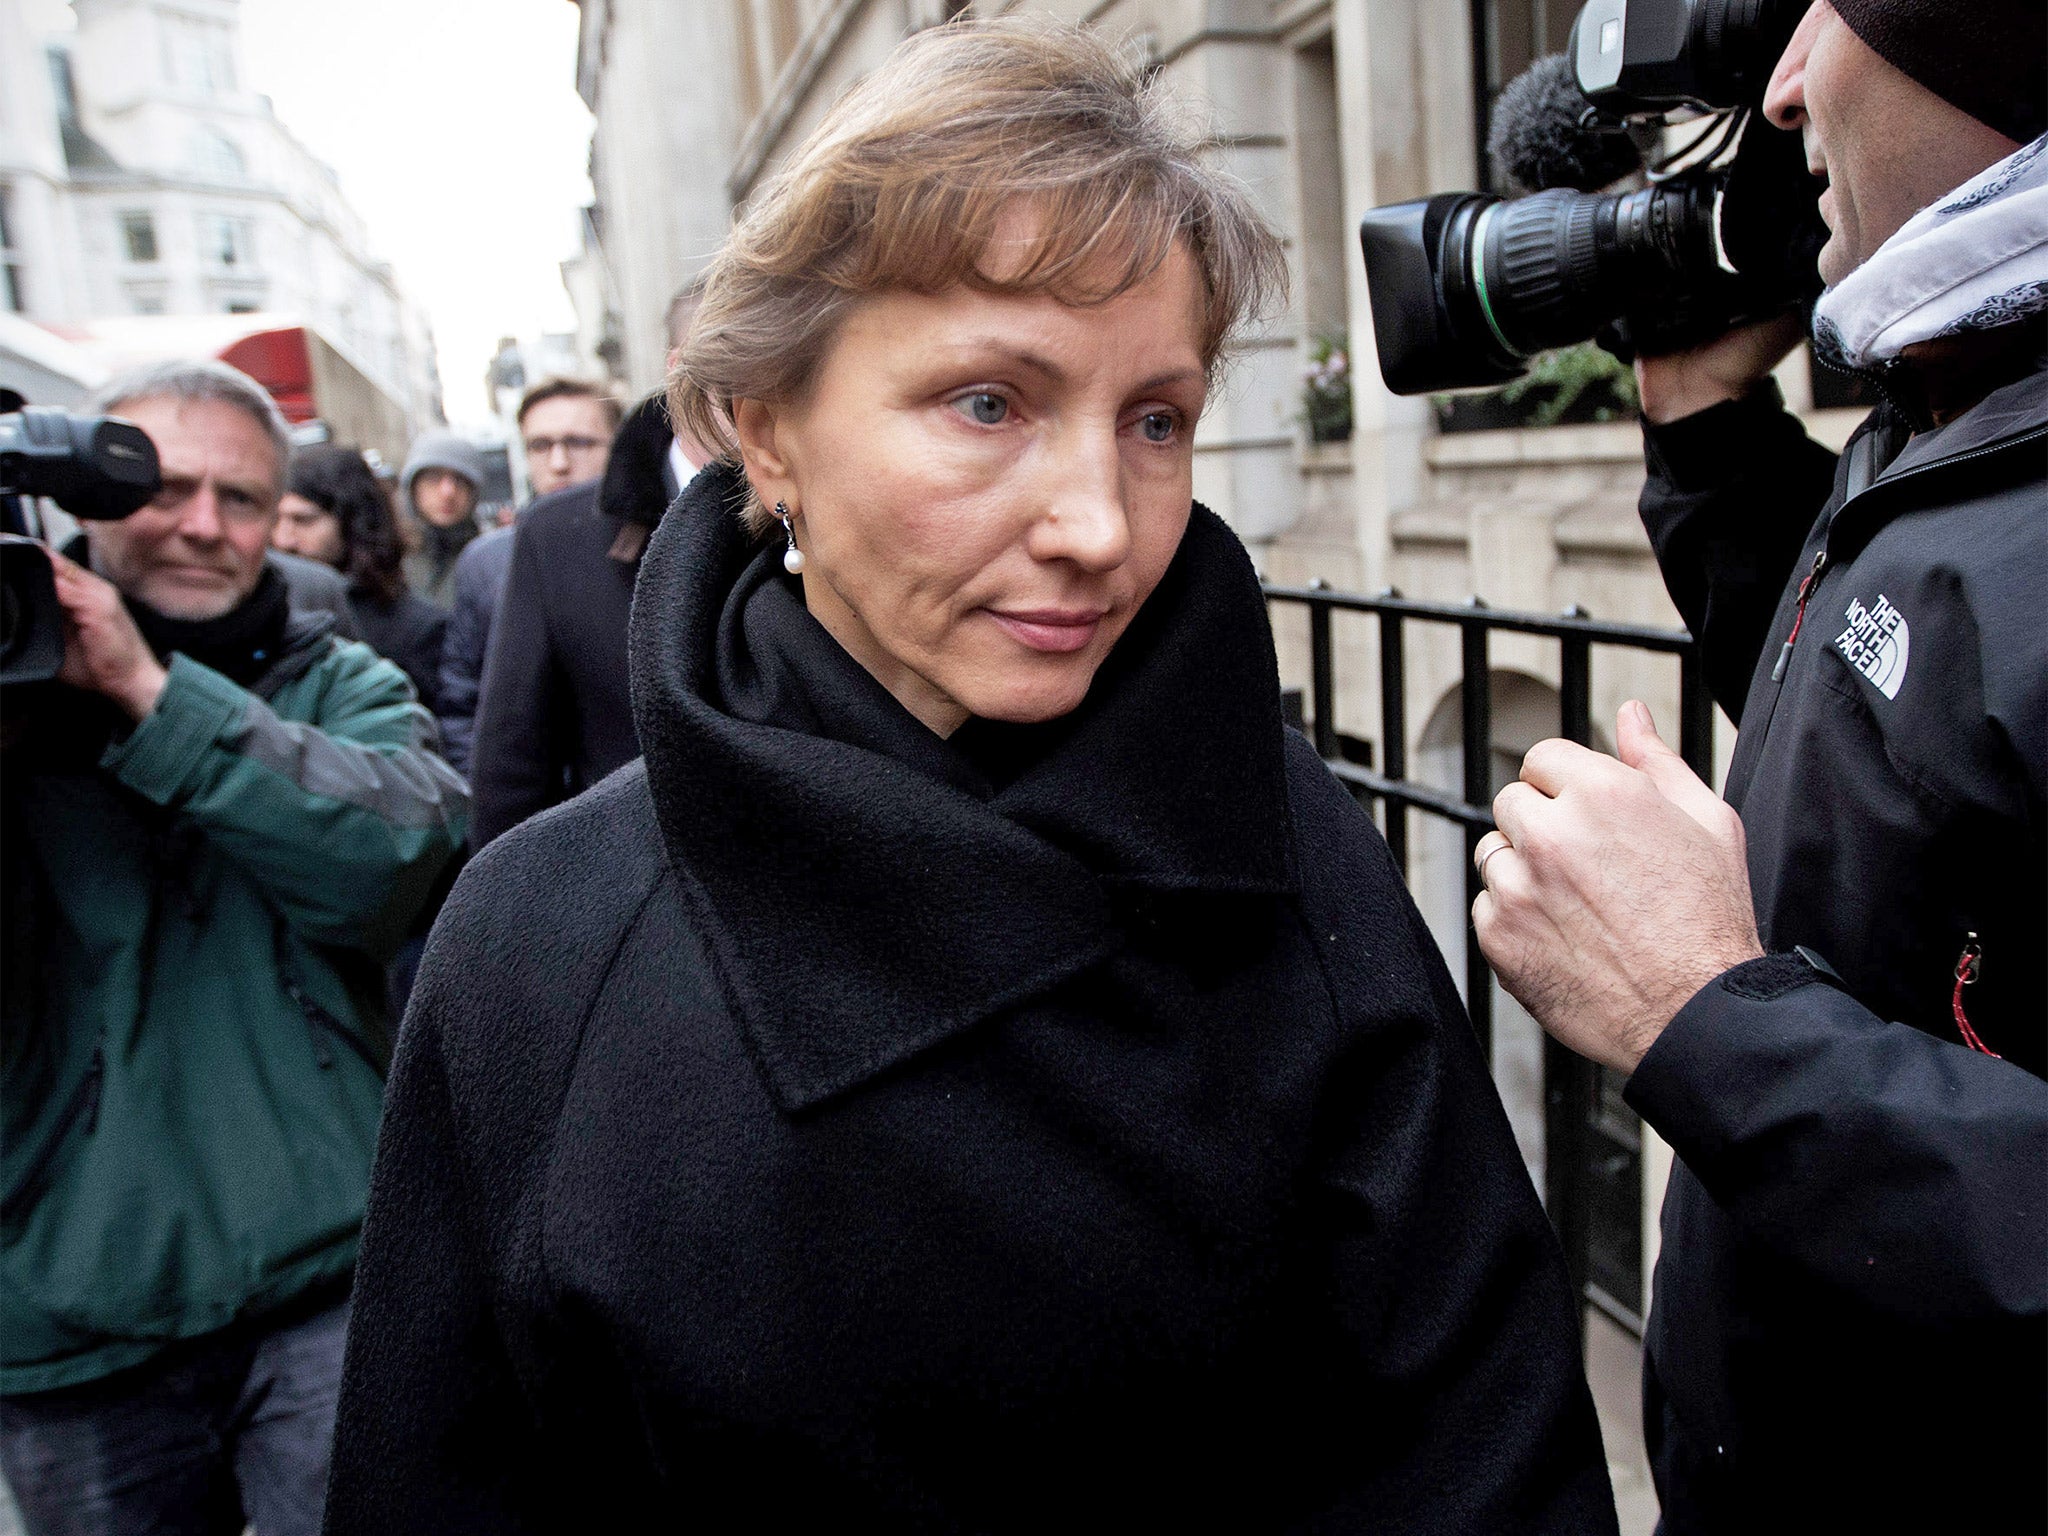 Marina Litvinenko, the widow of former KGB agent Alexander Litvinenko, leaves the High Court after the opening of the inquiry into his death